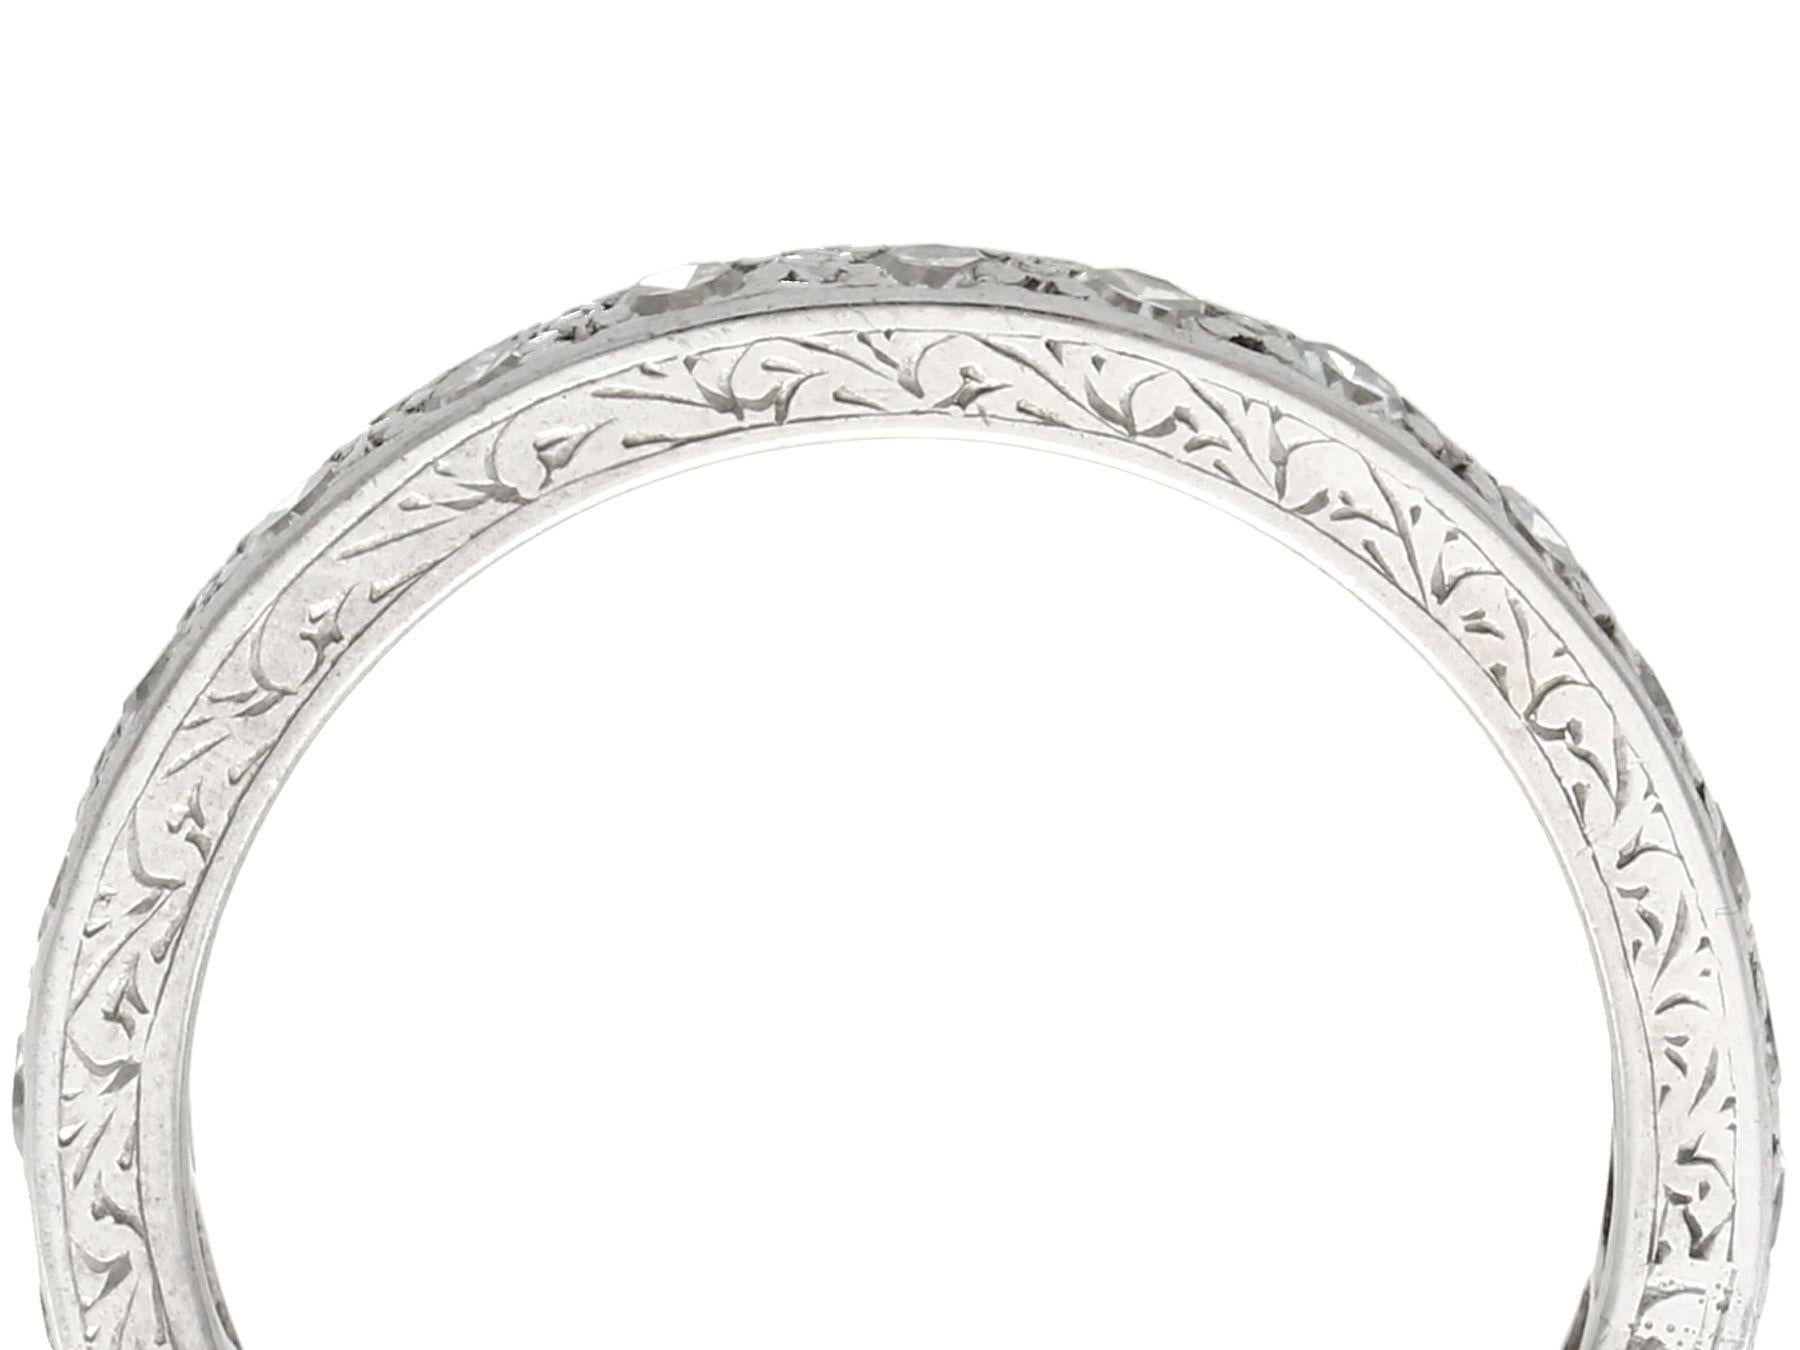 A fine and impressive antique 1930's 0.50 carat diamond and palladium full eternity ring; part of our diverse antique jewellery and estate jewelry collections.

This fine and impressive antique eternity ring has been crafted in palladium.

The full